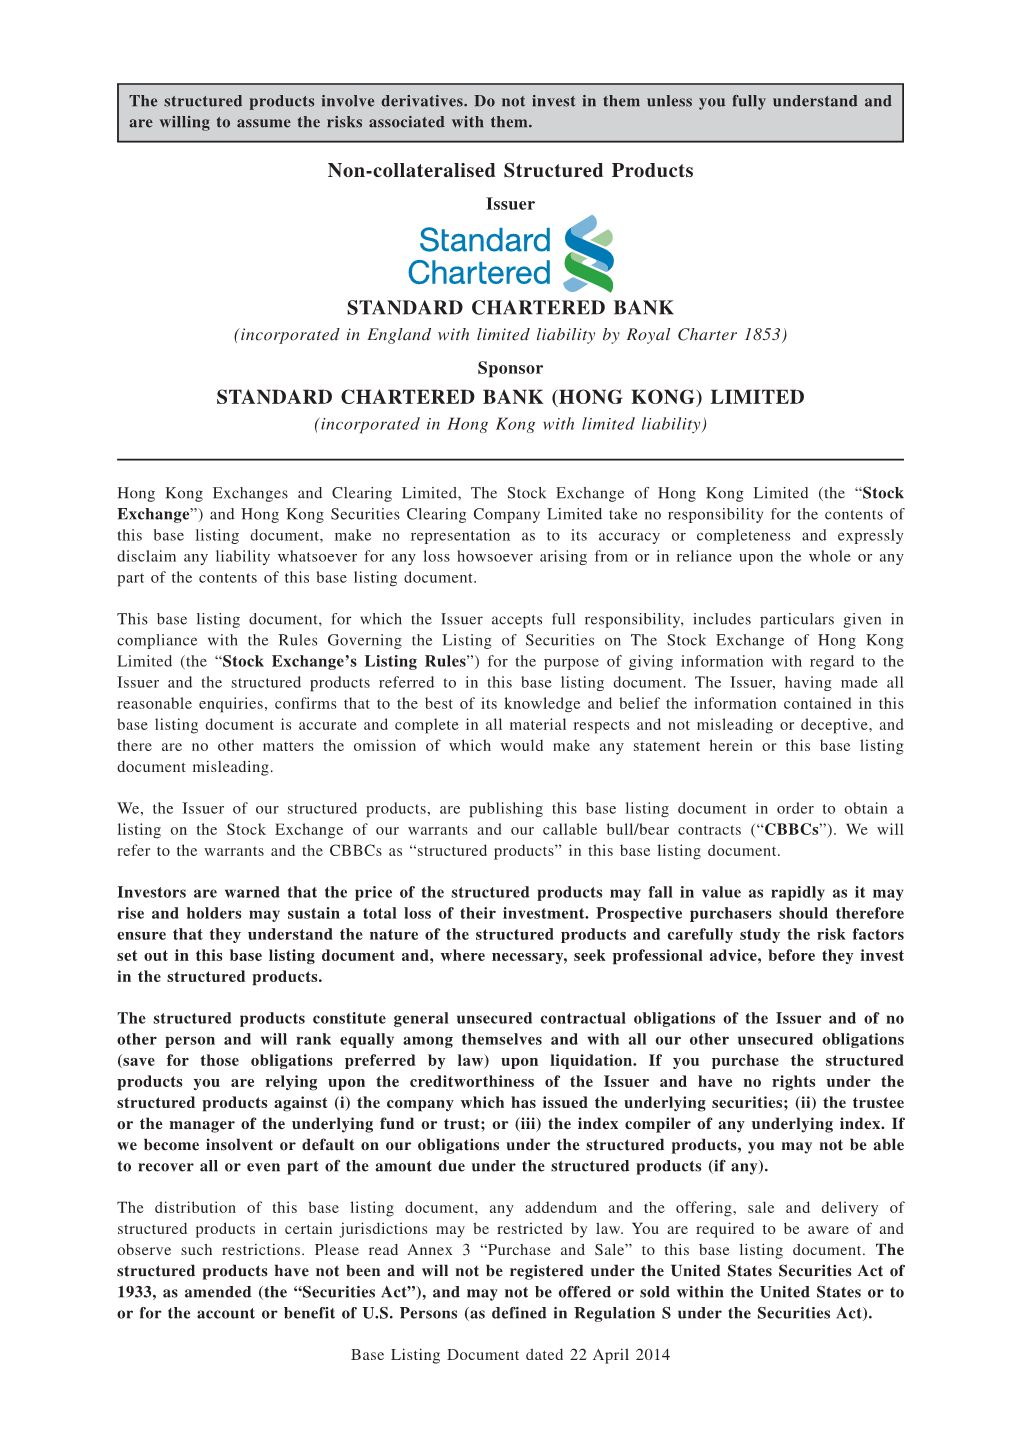 Non-Collateralised Structured Products STANDARD CHARTERED BANK STANDARD CHARTERED BANK (HONG KONG) LIMITED